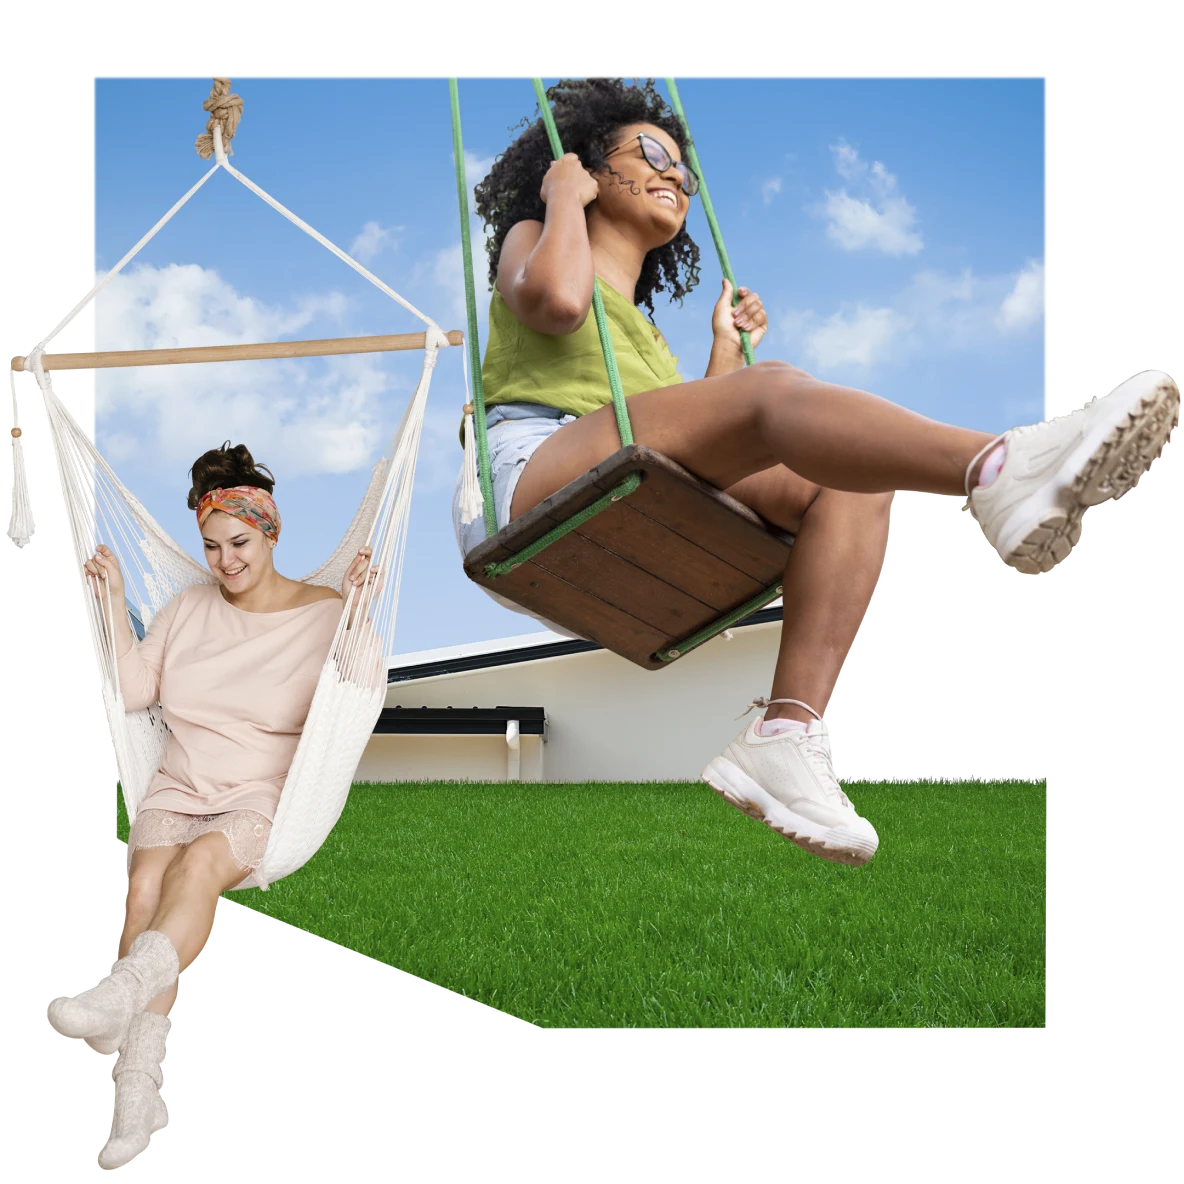 A woman in pink on a hanging chair swing is on the left, kicking up a leg. A woman on the right is in a green top and white shorts on a wooden swing with green handles. Blue sky in the background, bright green grass at the bottom.